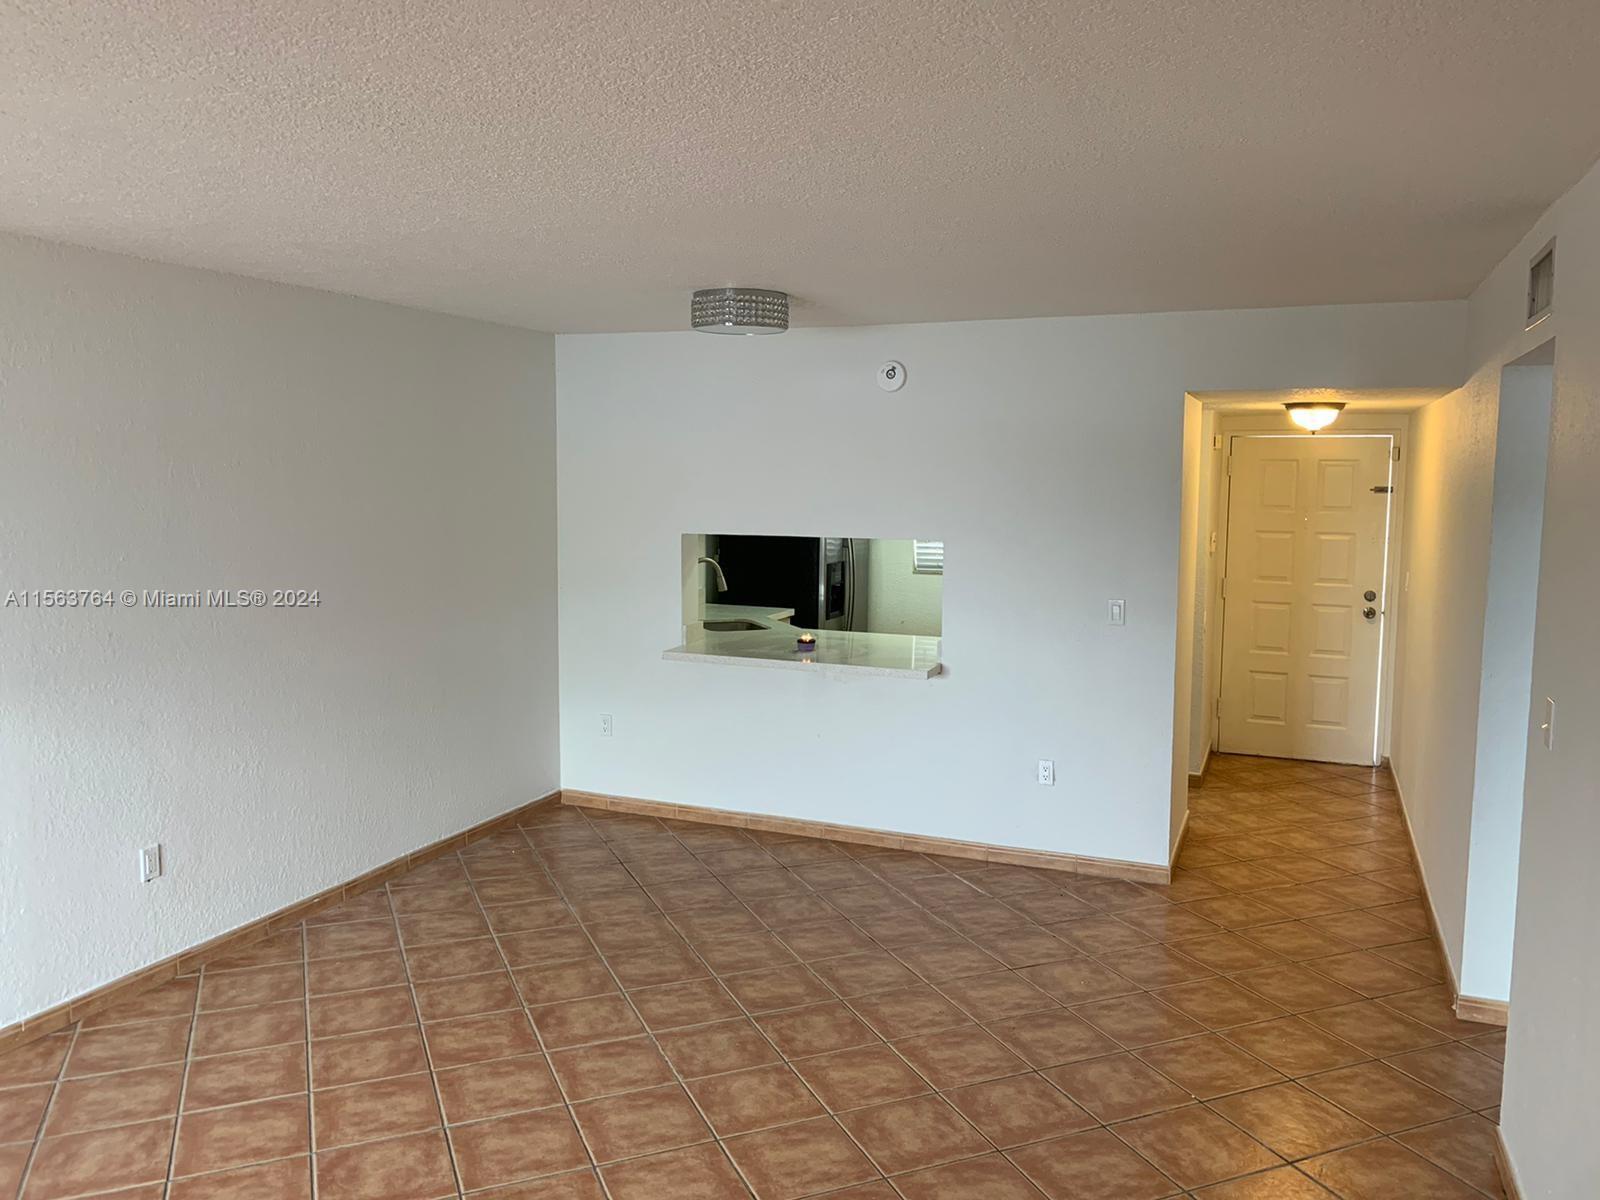 Photo of 15969 NW 64th Ave #410 in Miami Lakes, FL